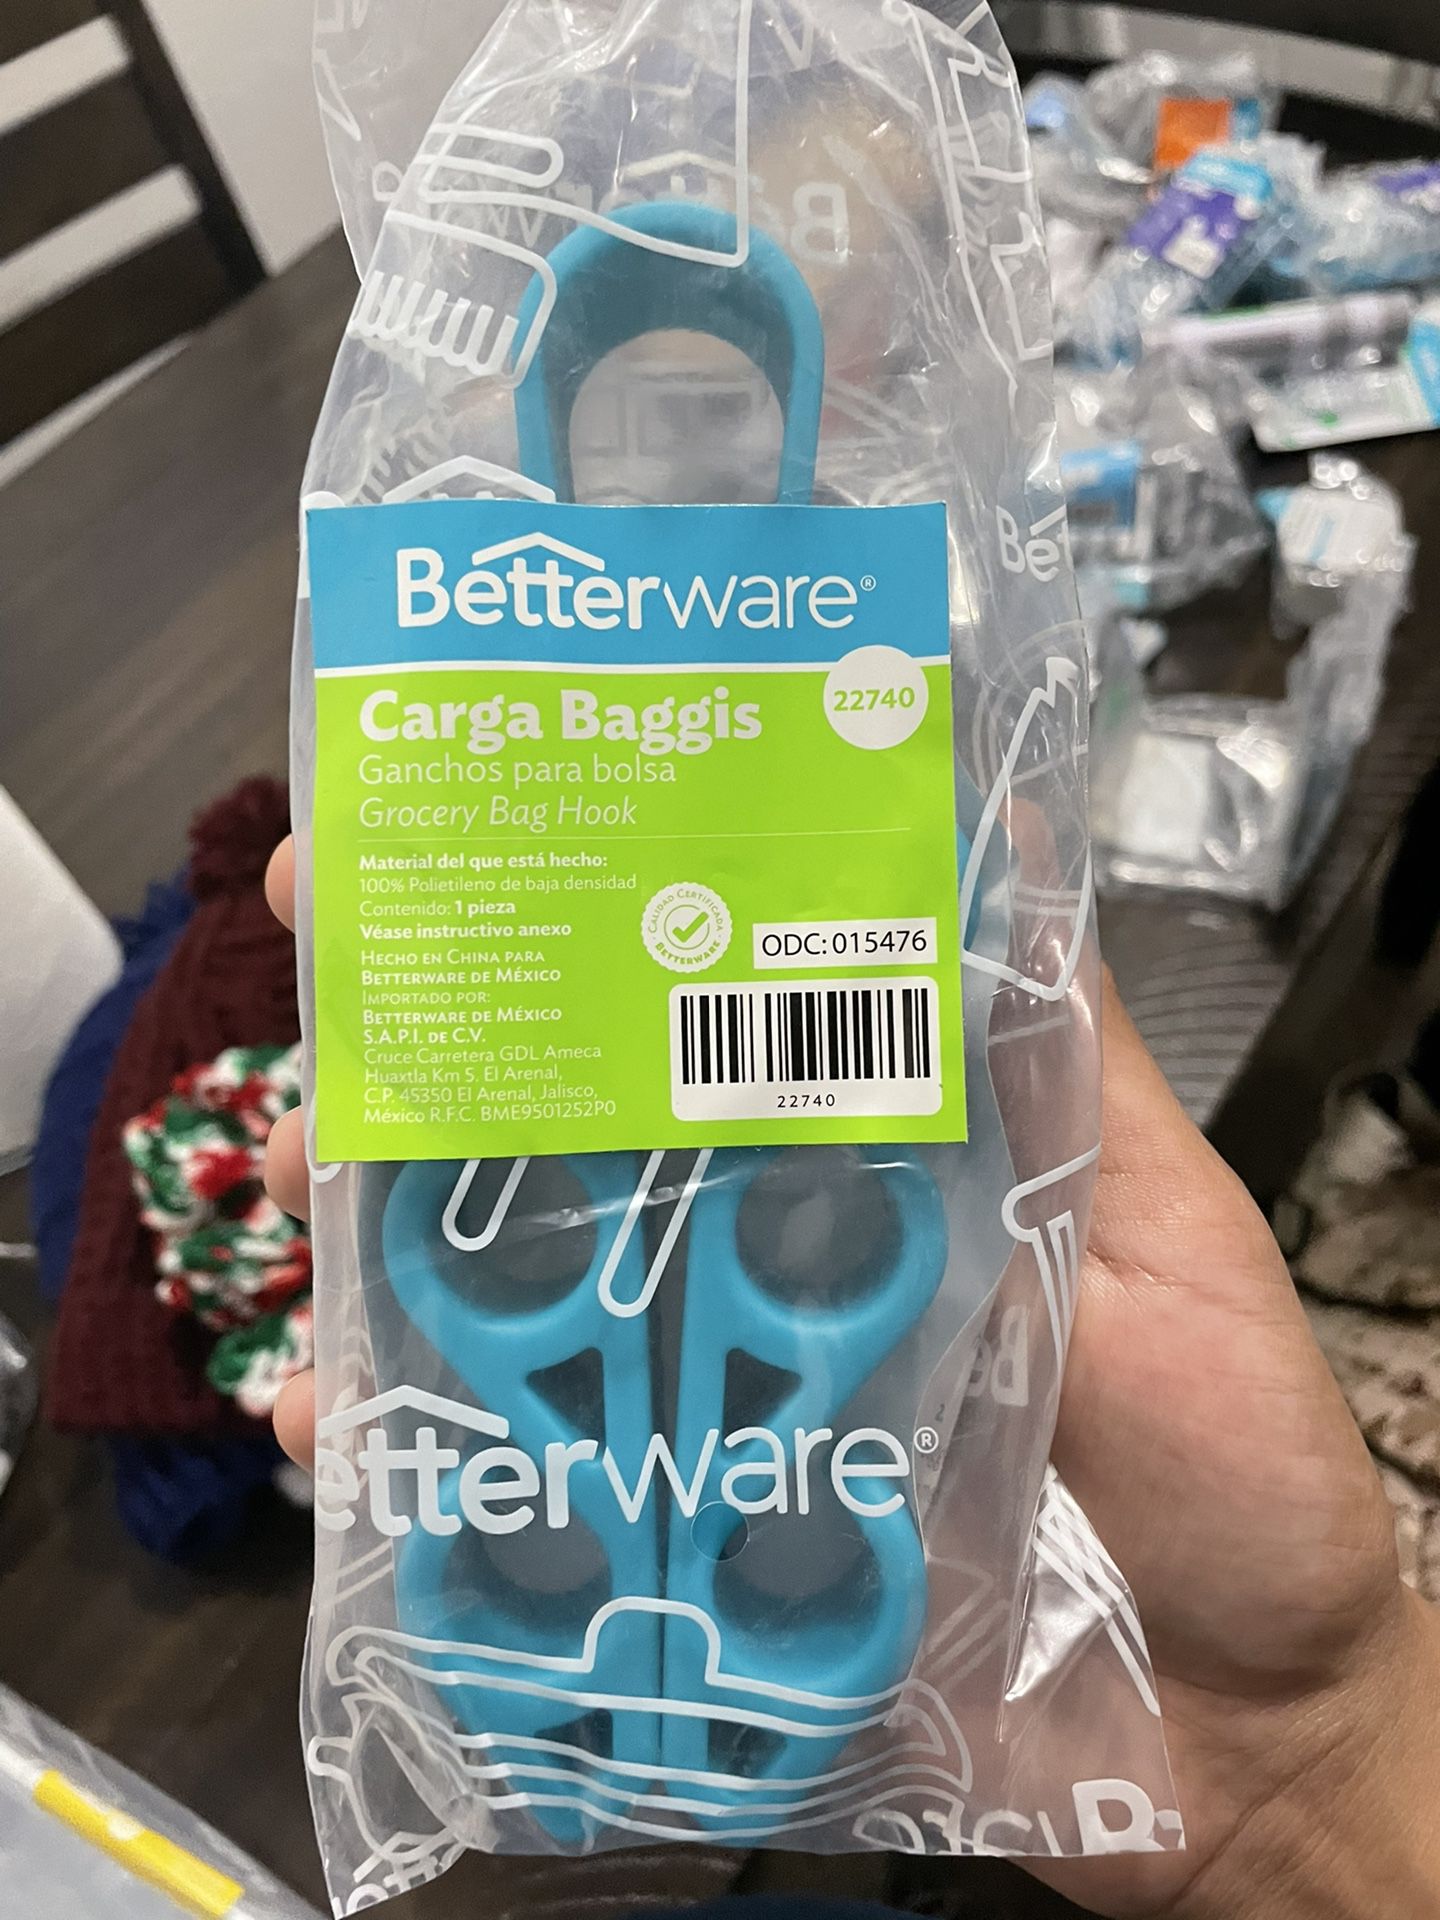 BetterWare Products